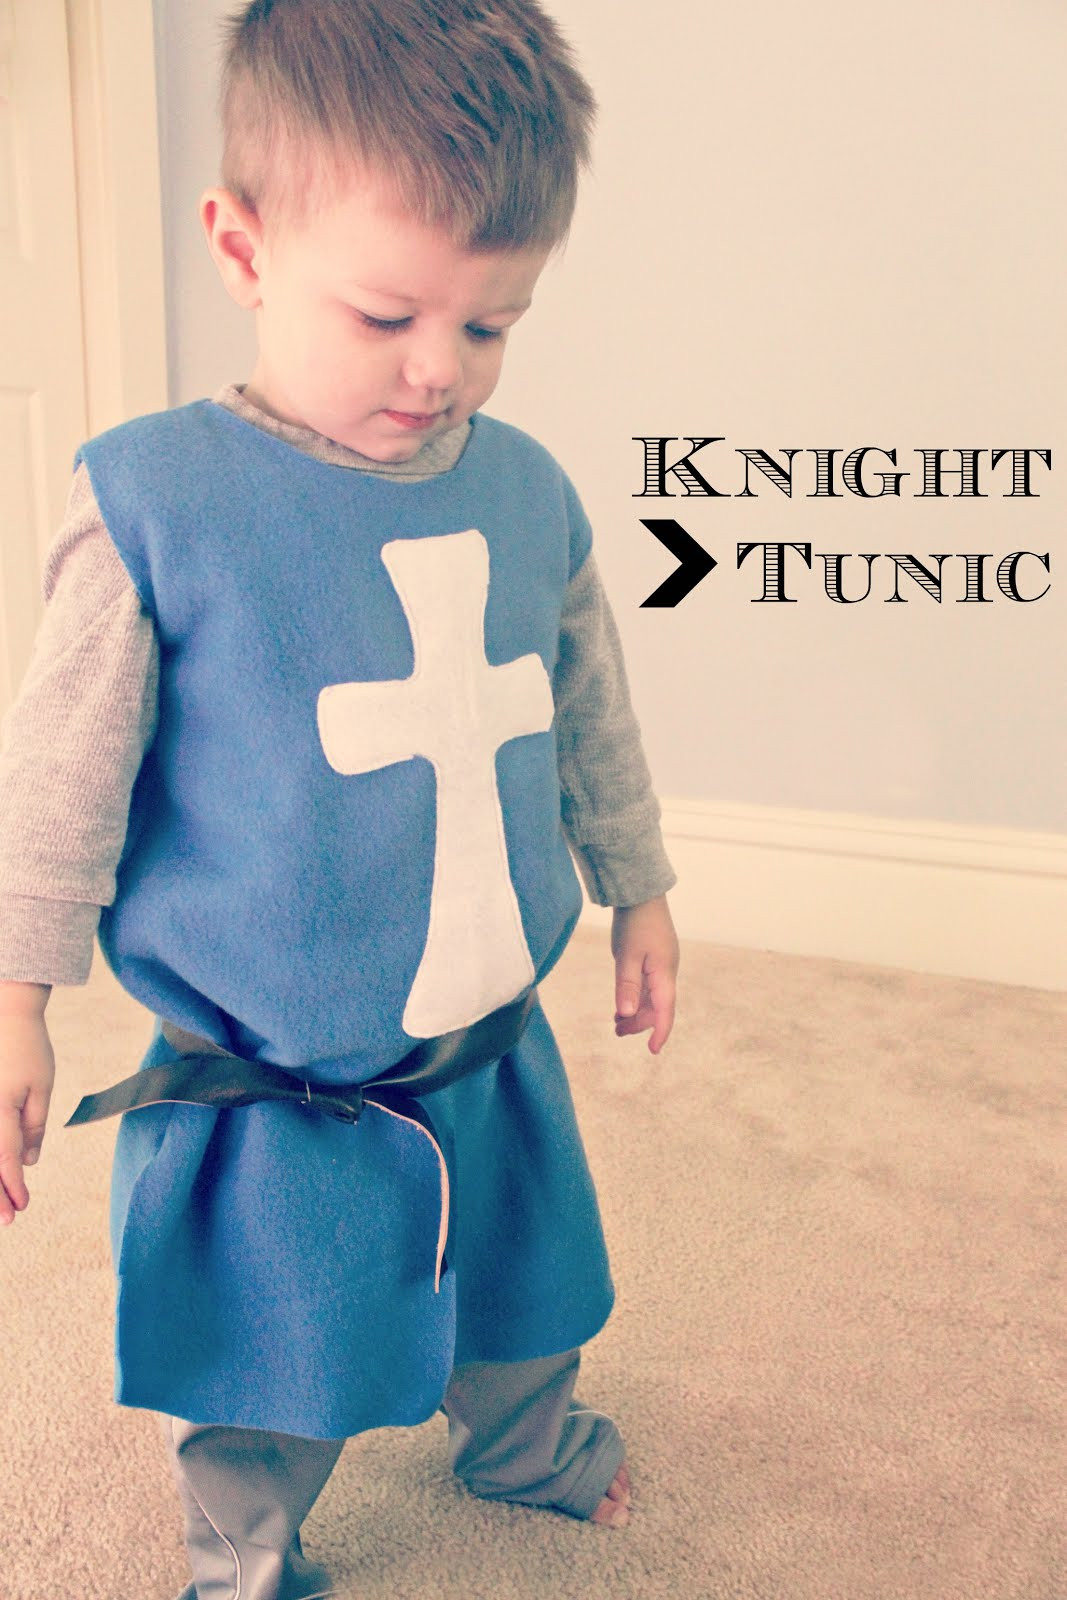 Knight Costume DIY
 EAT SLEEP MAKE Knight Party How to Make a Knight s Tunic